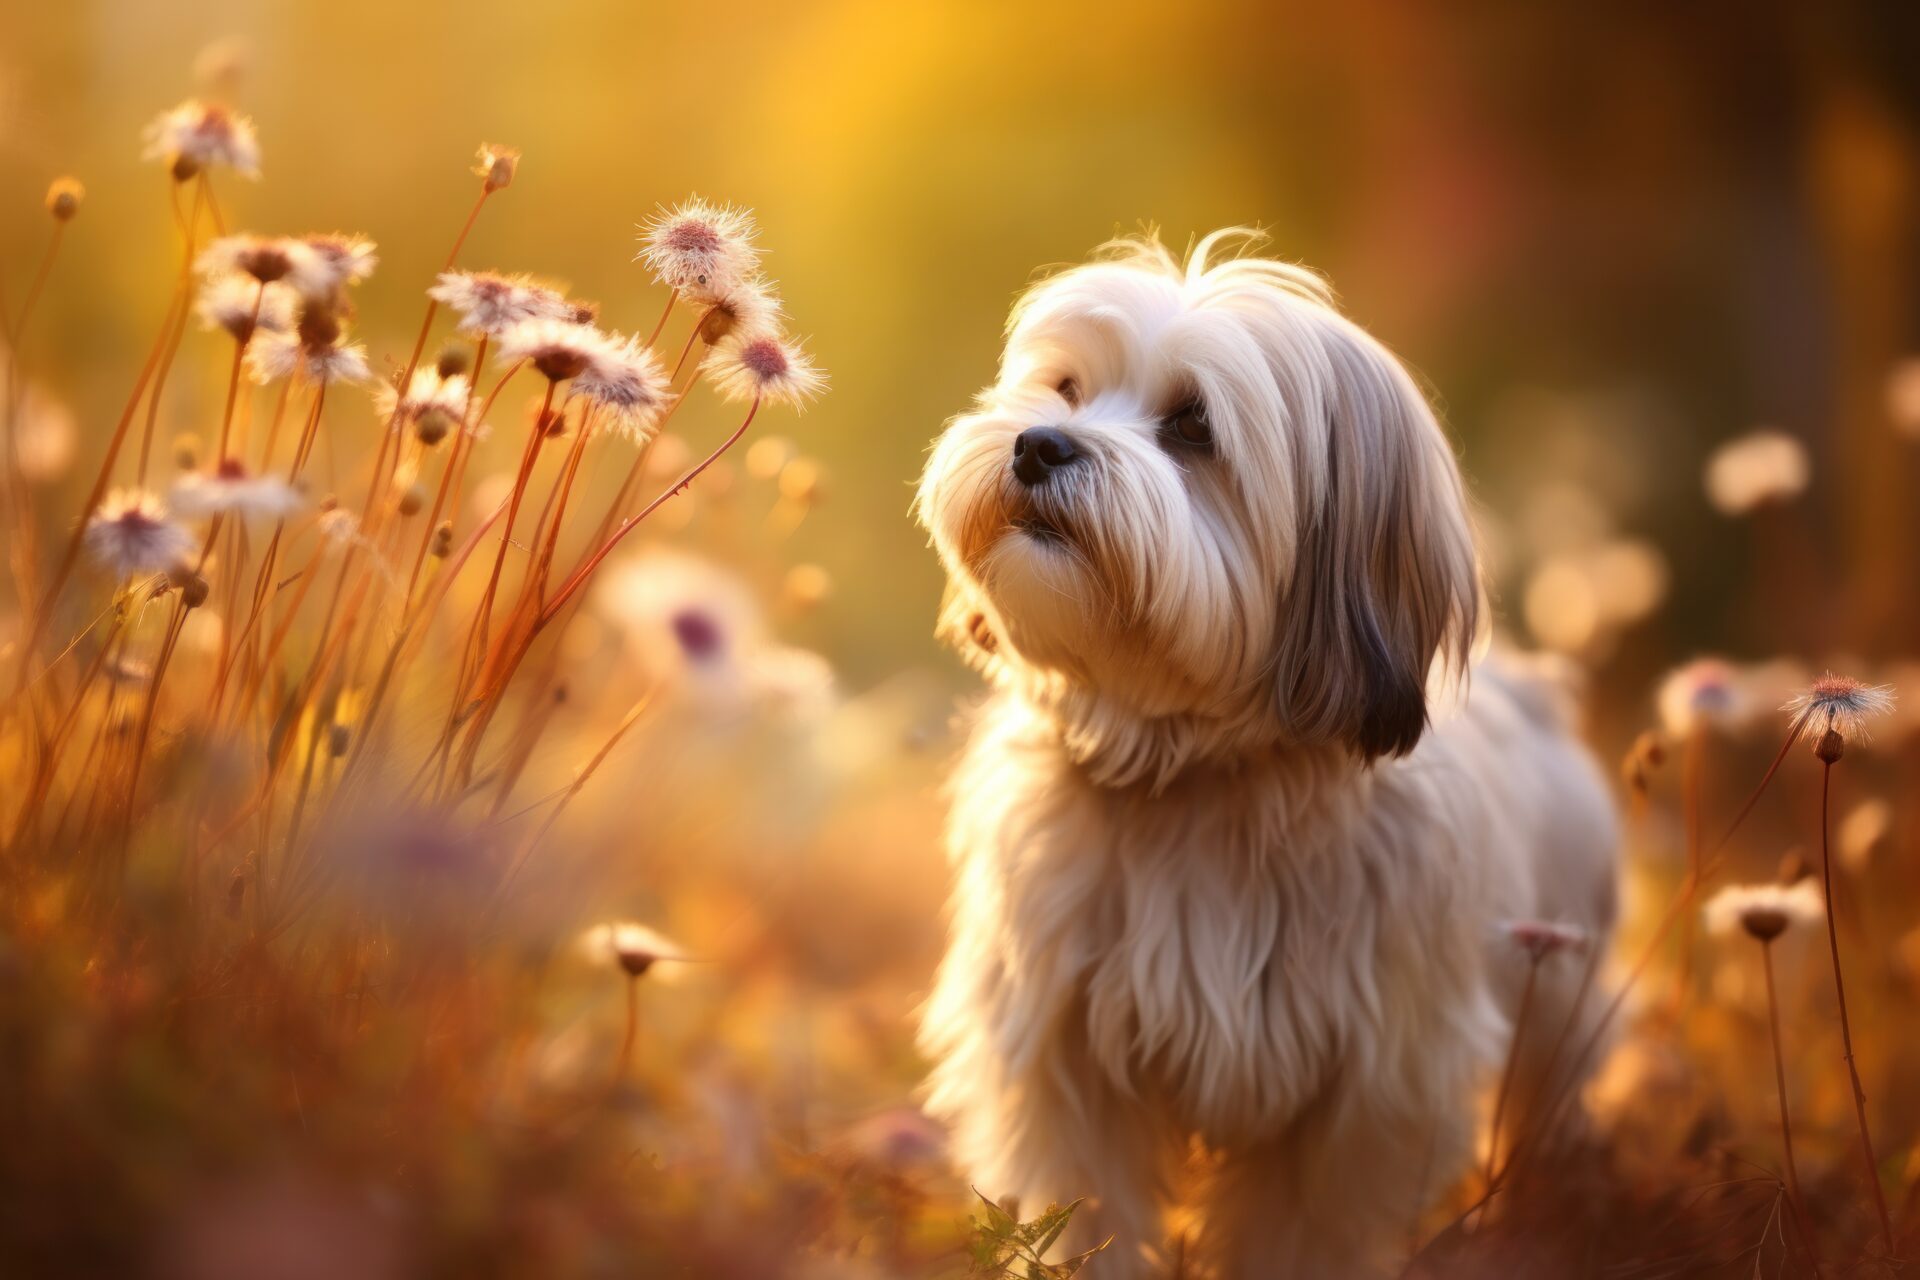 Lhasa apso in a field of flowers sniffing them